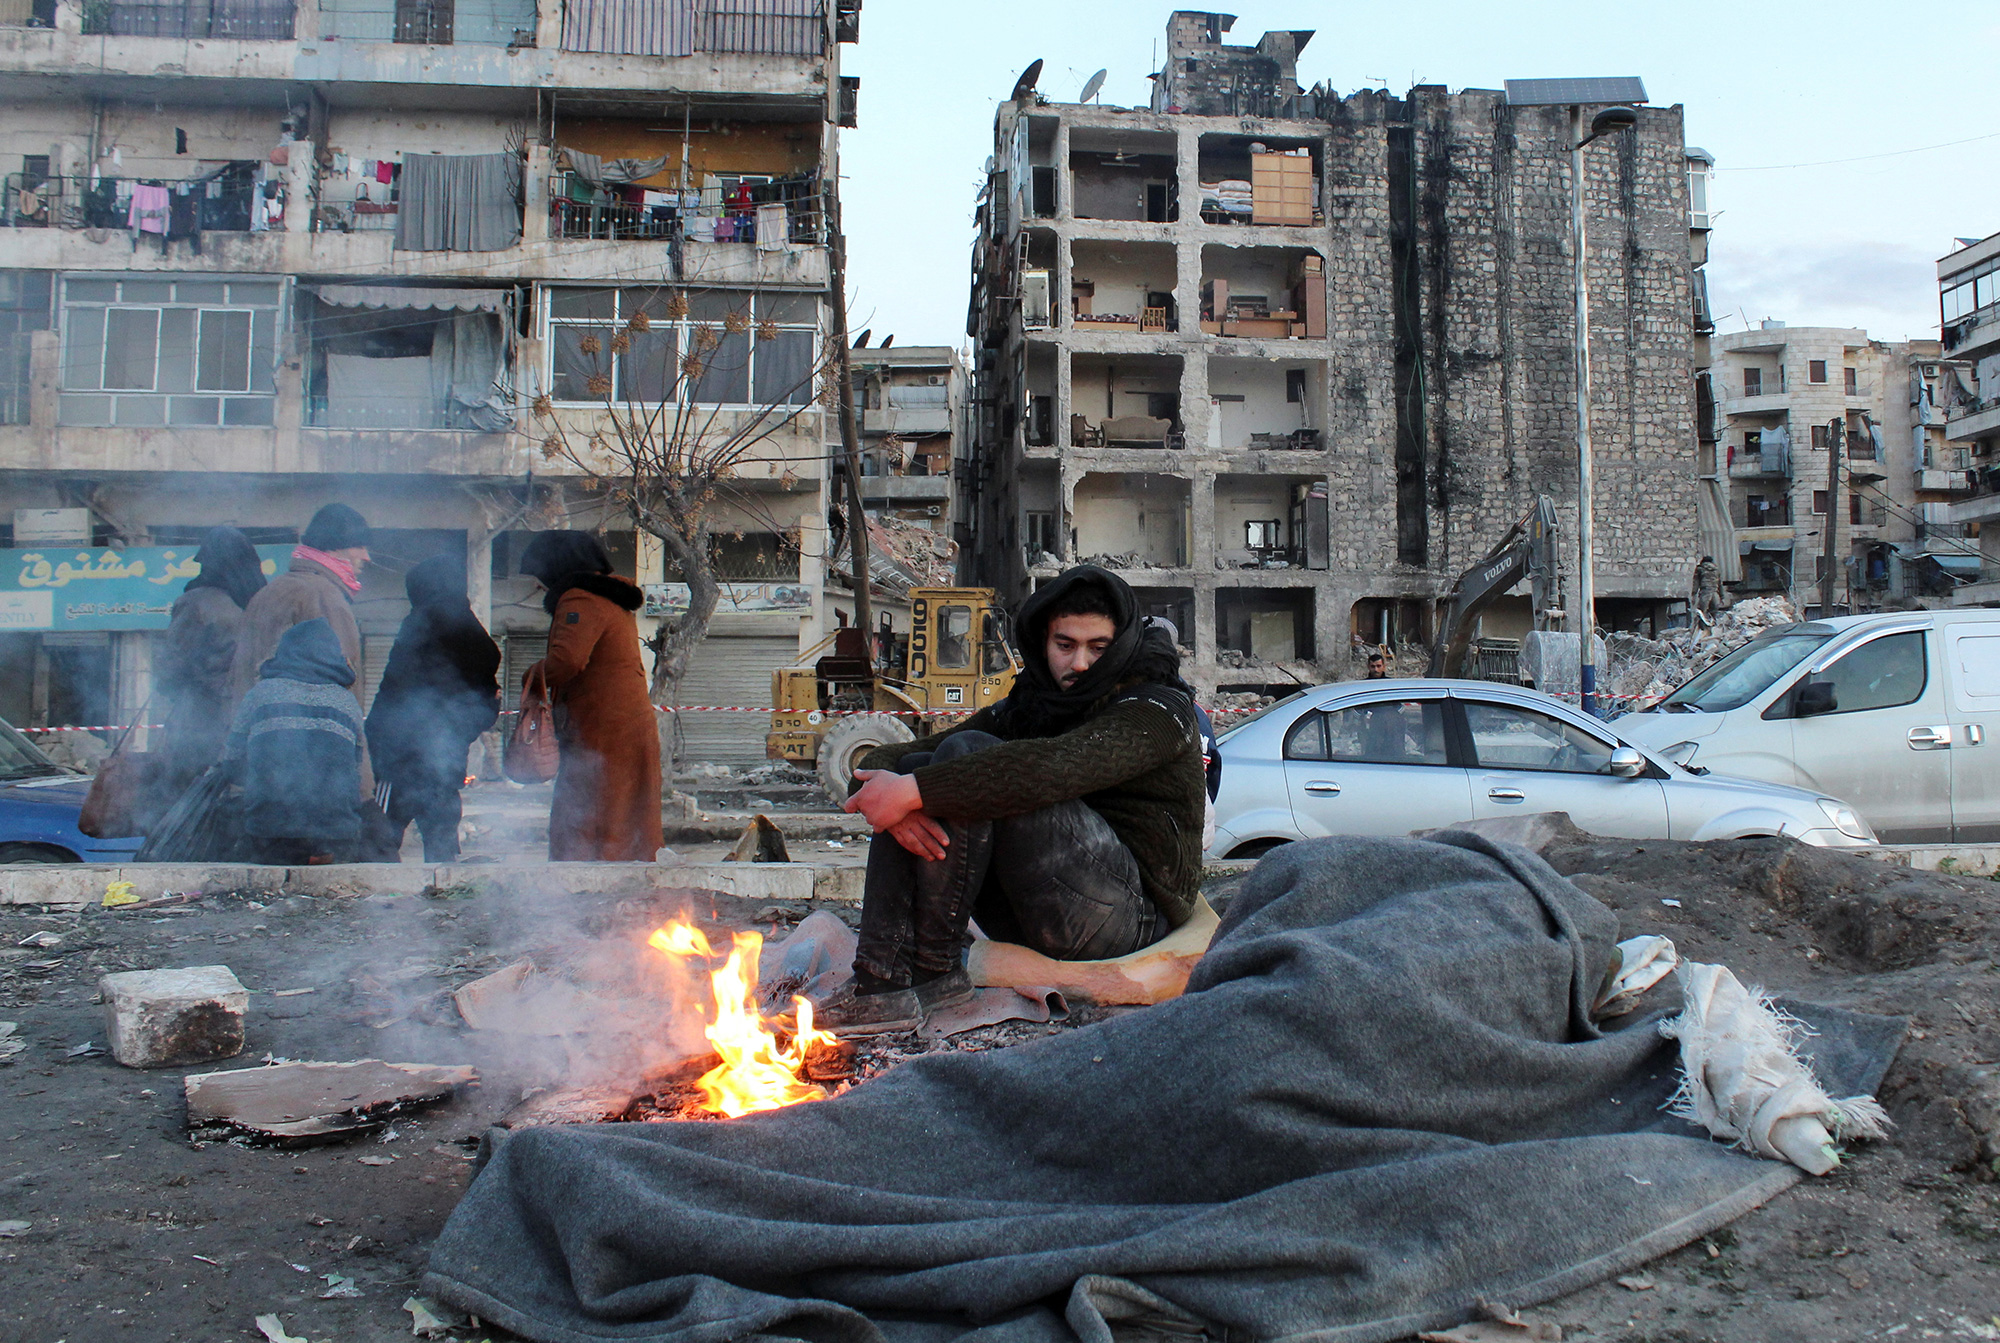 A man who evacuated his home warms up by a fire in the street after the earthquake in Aleppo, Syria, on February 8.